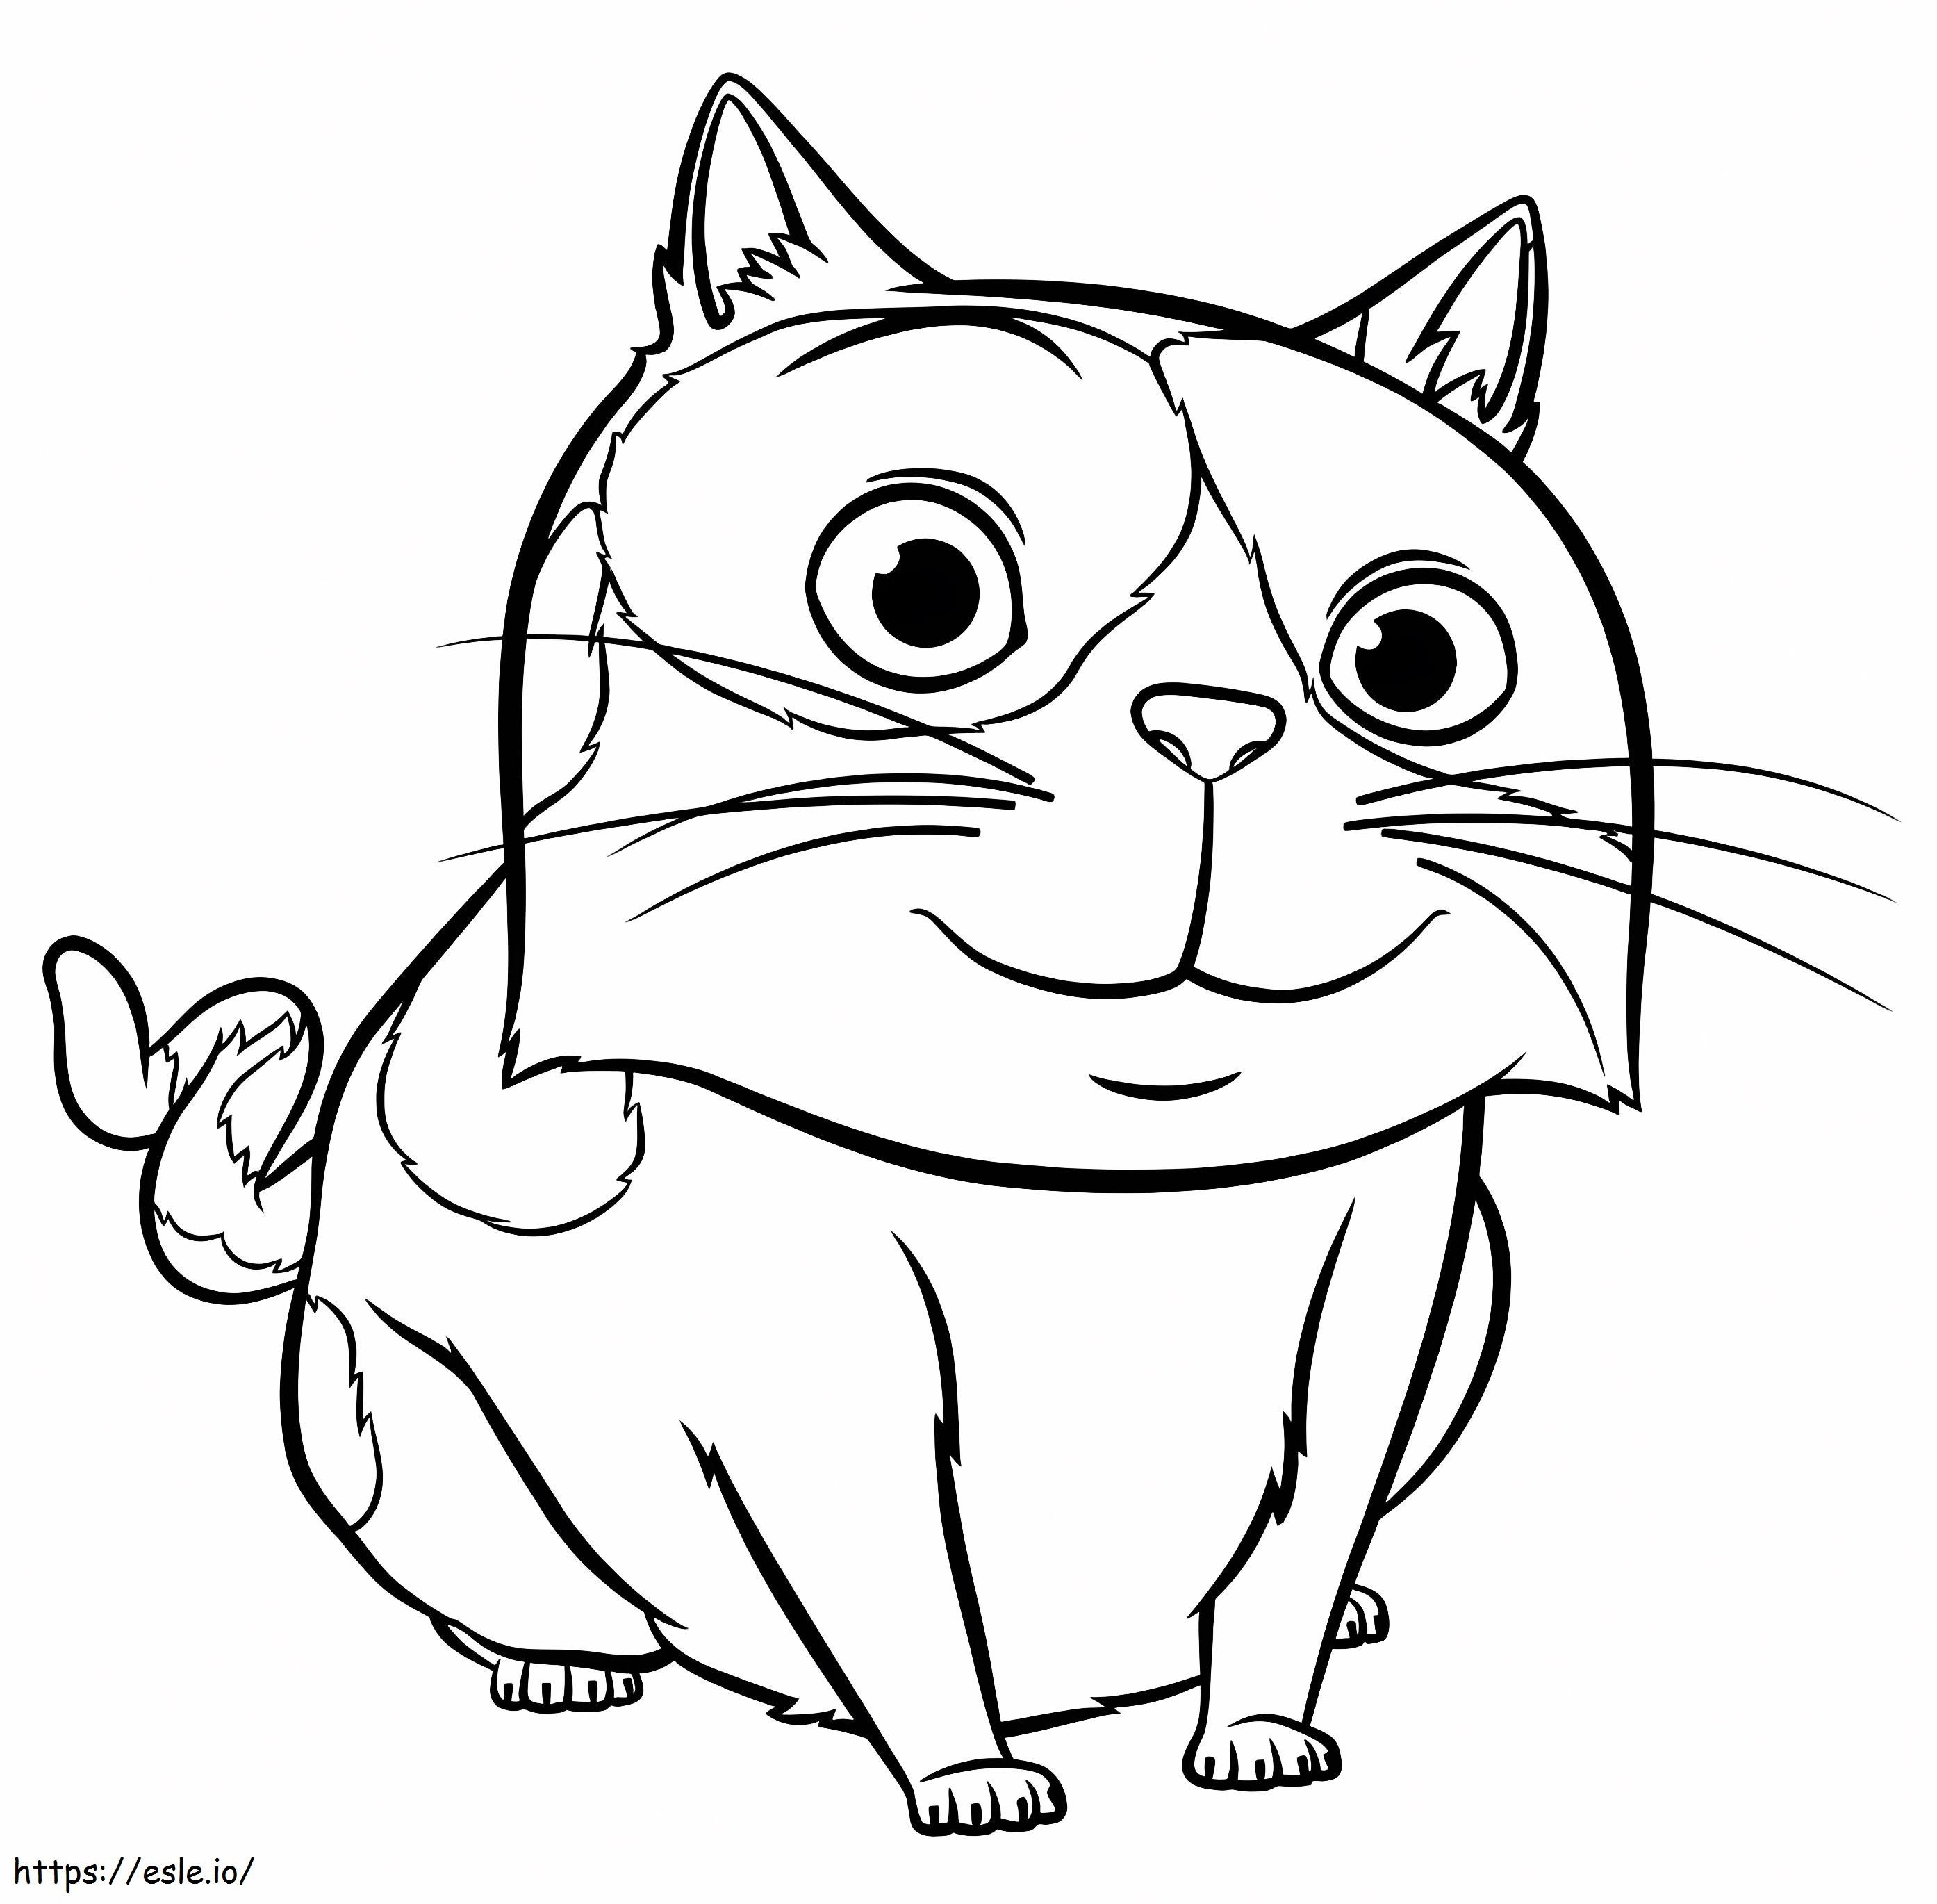 Pig Cat From Home coloring page